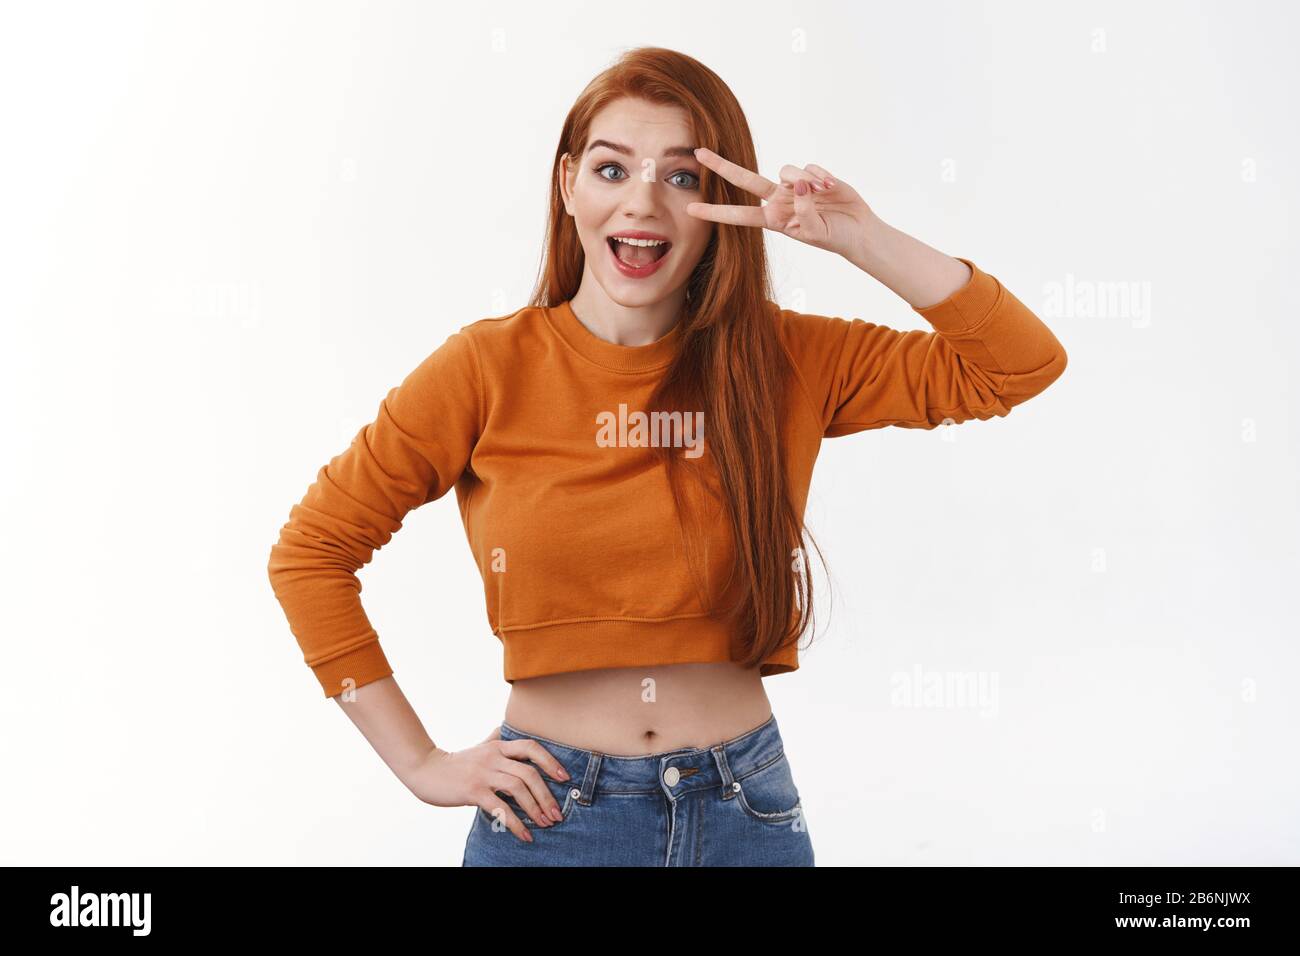 Cute and silly ginger girl in orange cropped top, jeans, hold hand on hip,  make peace or victory sign near eye and smiling joyfully, send positivity  Stock Photo - Alamy